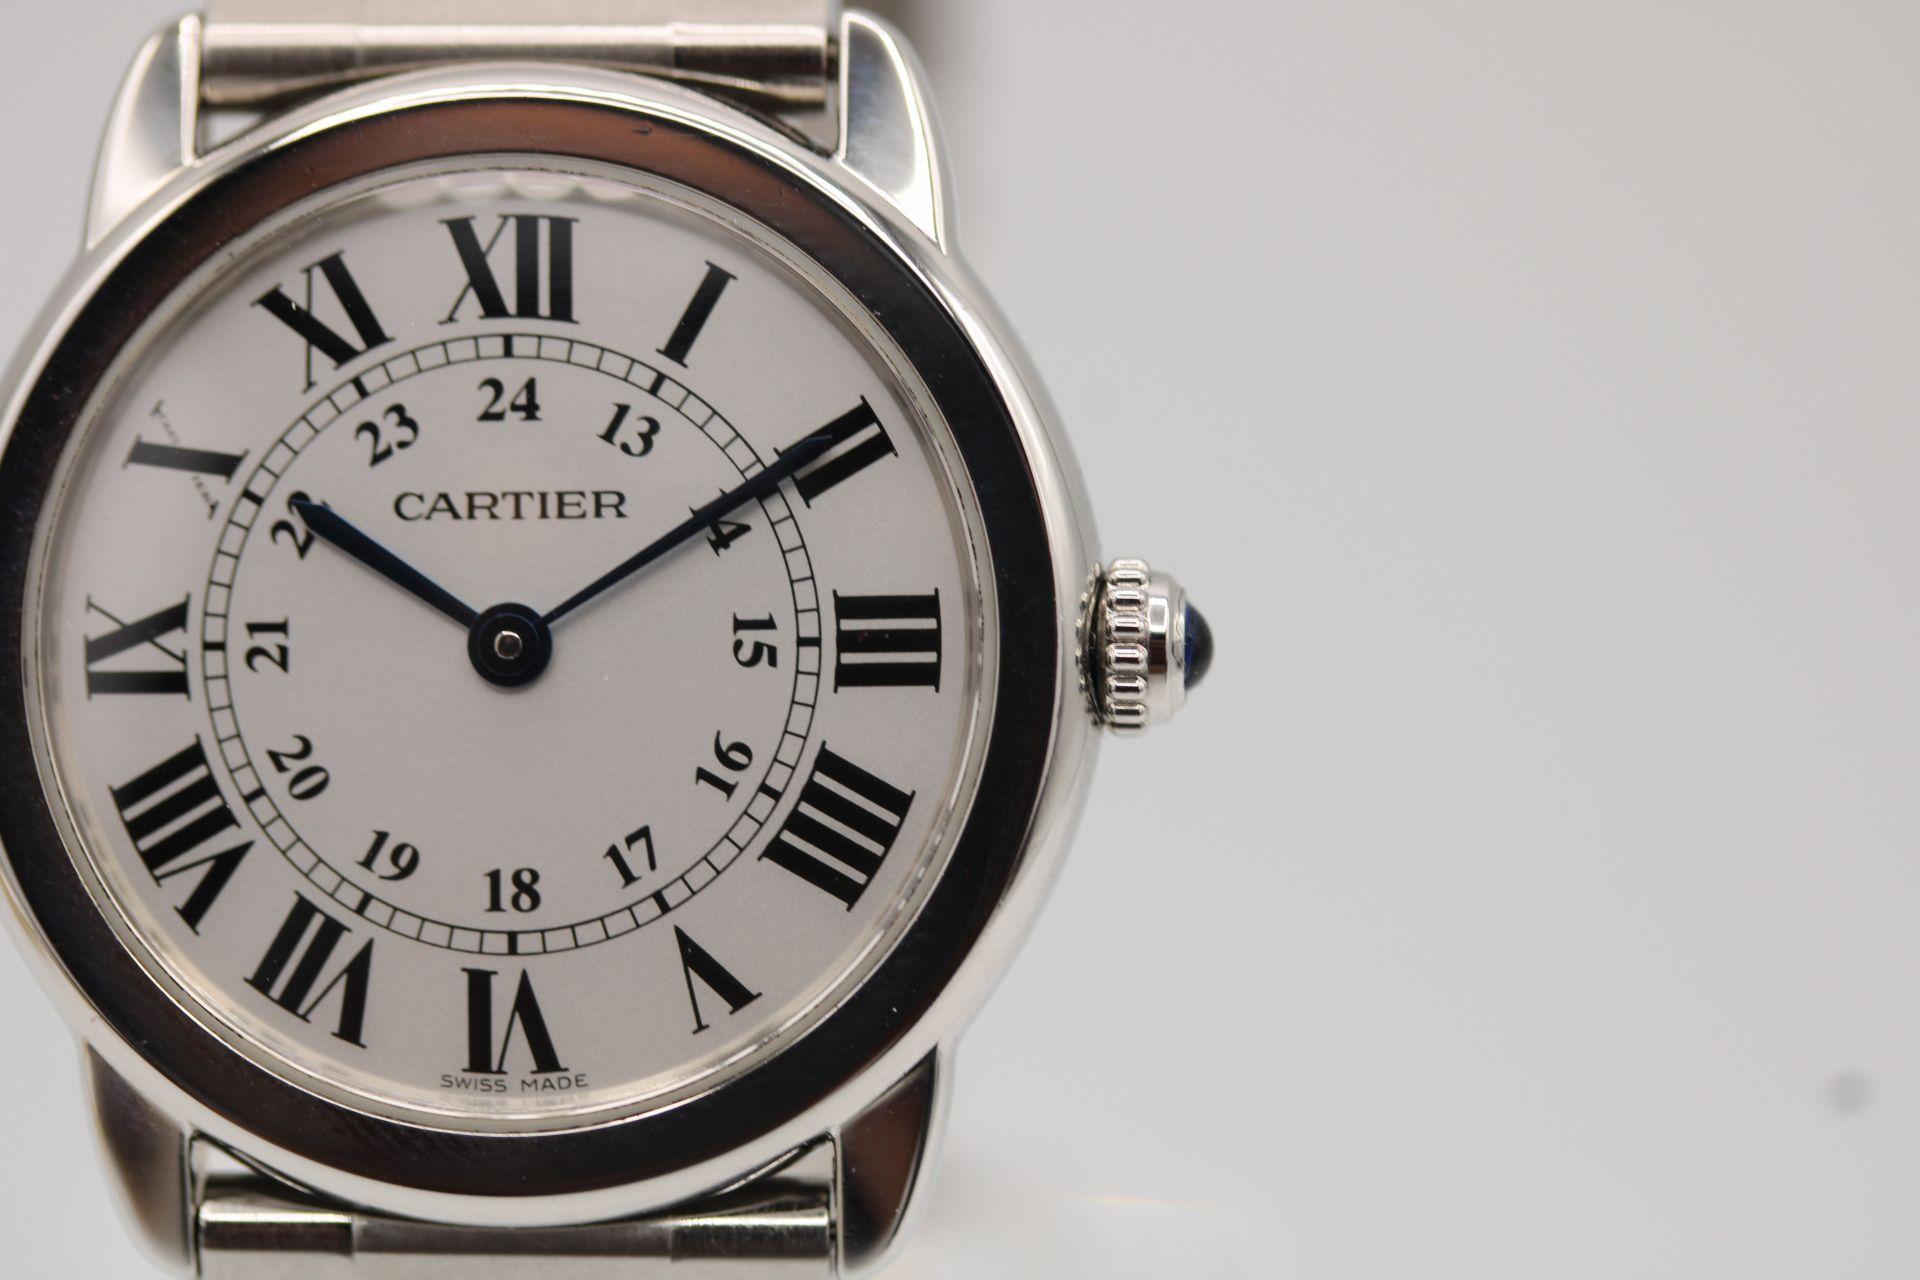 Classic Cartier with a twist, the Black Roman Numeral hour markers a signature of Cartier in a lesser case being a 29.5mm steel round case known as the 'Ronde Solo' one of the more modern designs to be released by Cartier. One of the most recent